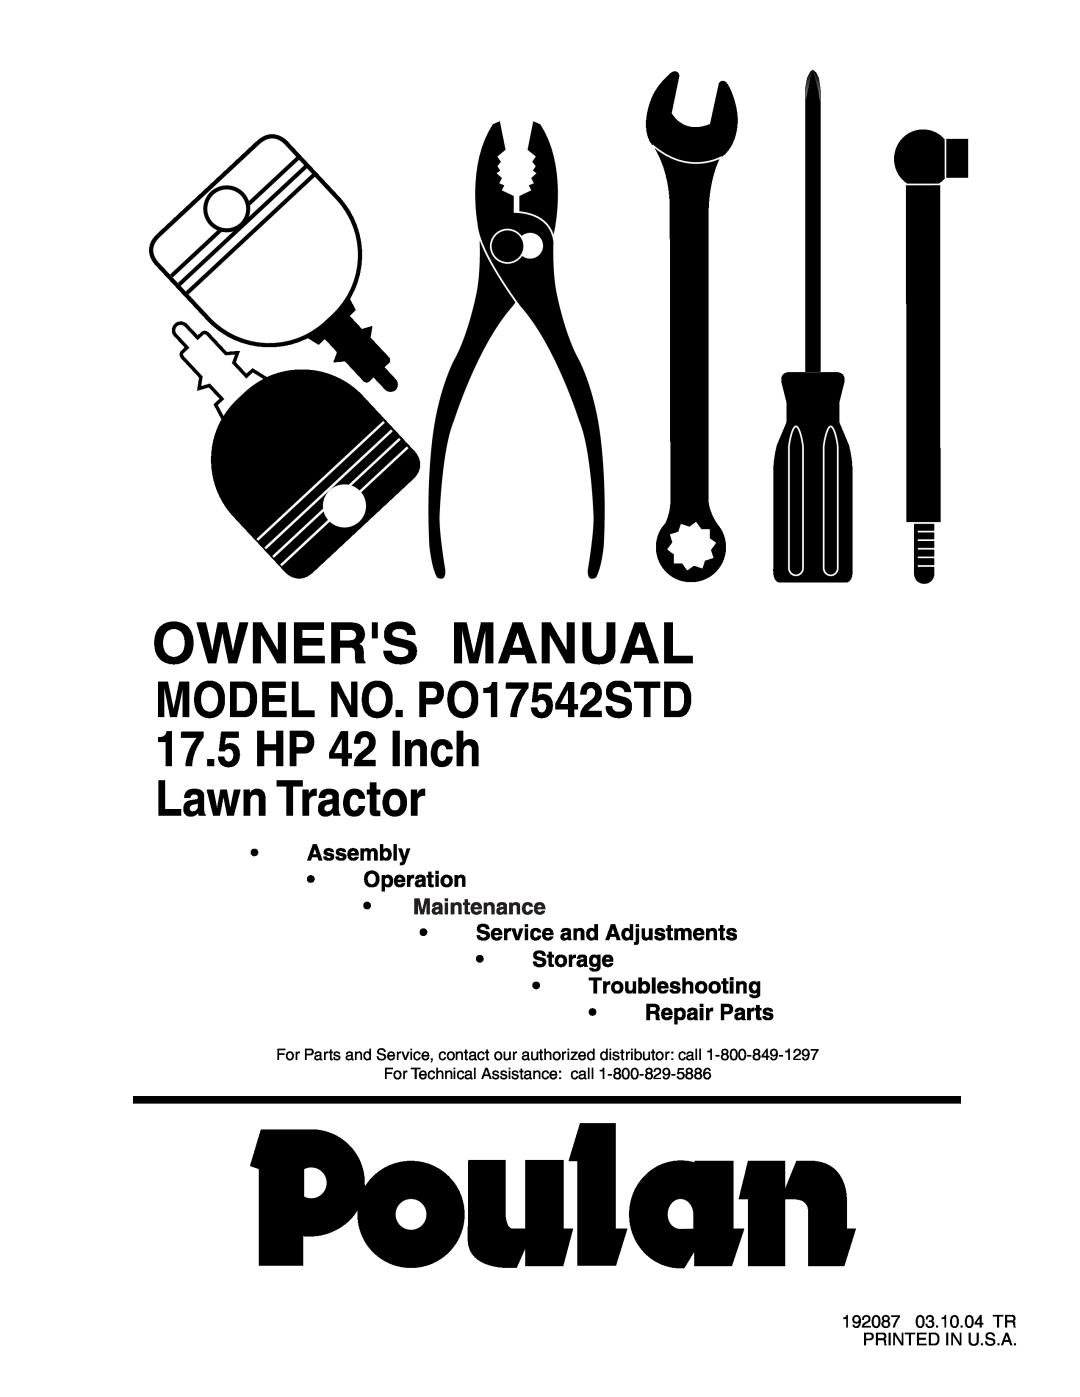 Poulan manual MODEL NO. PO17542STD 17.5 HP 42 Inch Lawn Tractor, 192087 03.10.04 TR PRINTED IN U.S.A 